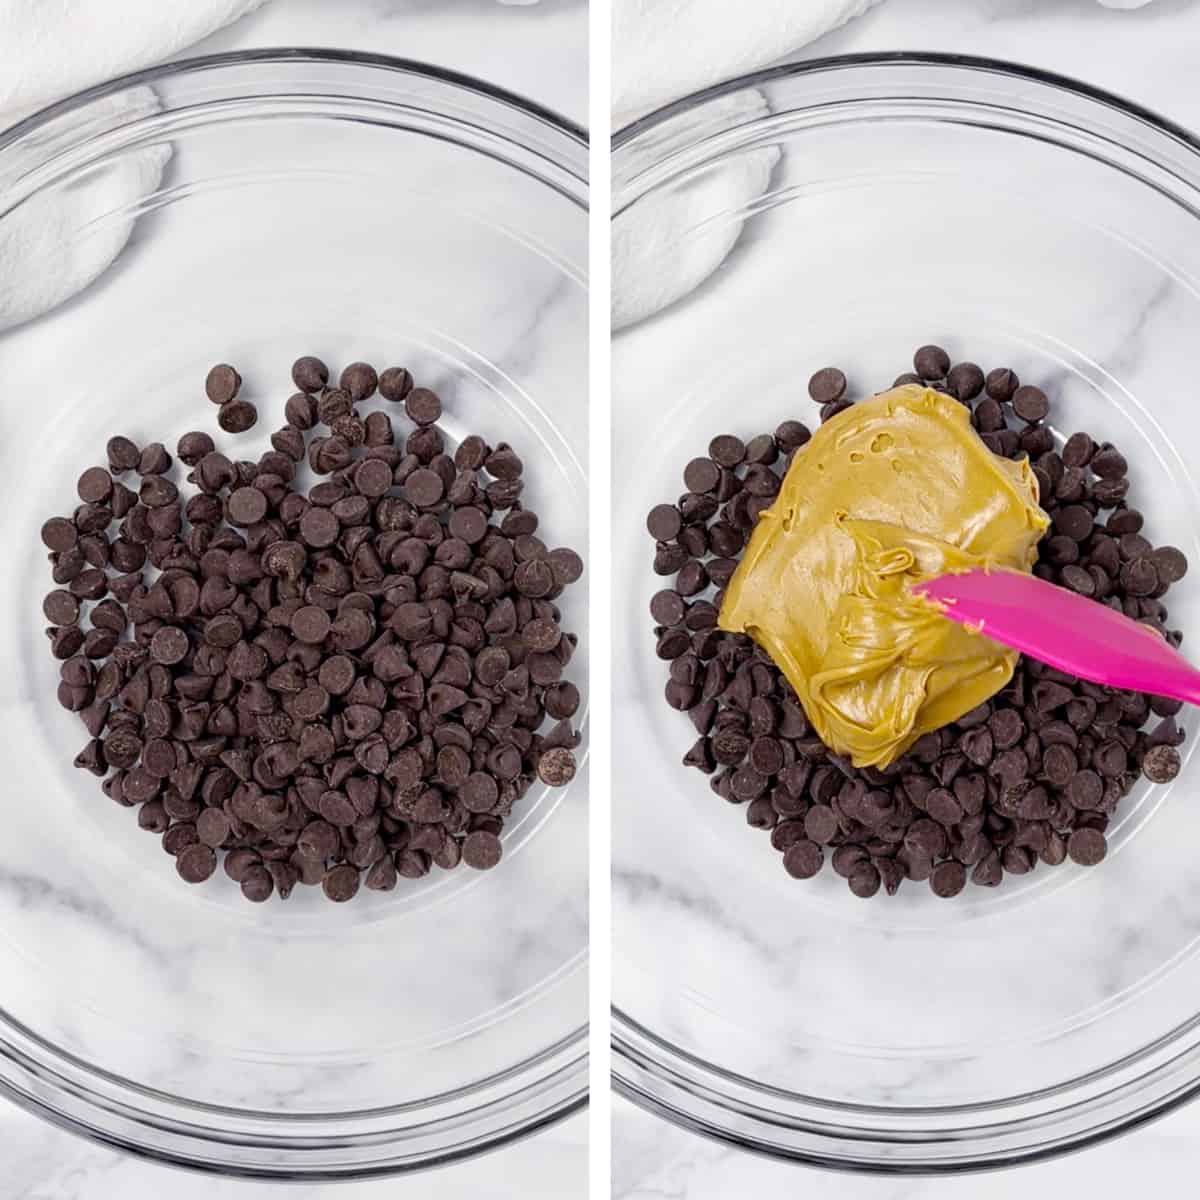 Chocolate chips and peanut butter in a clear glass bowl.